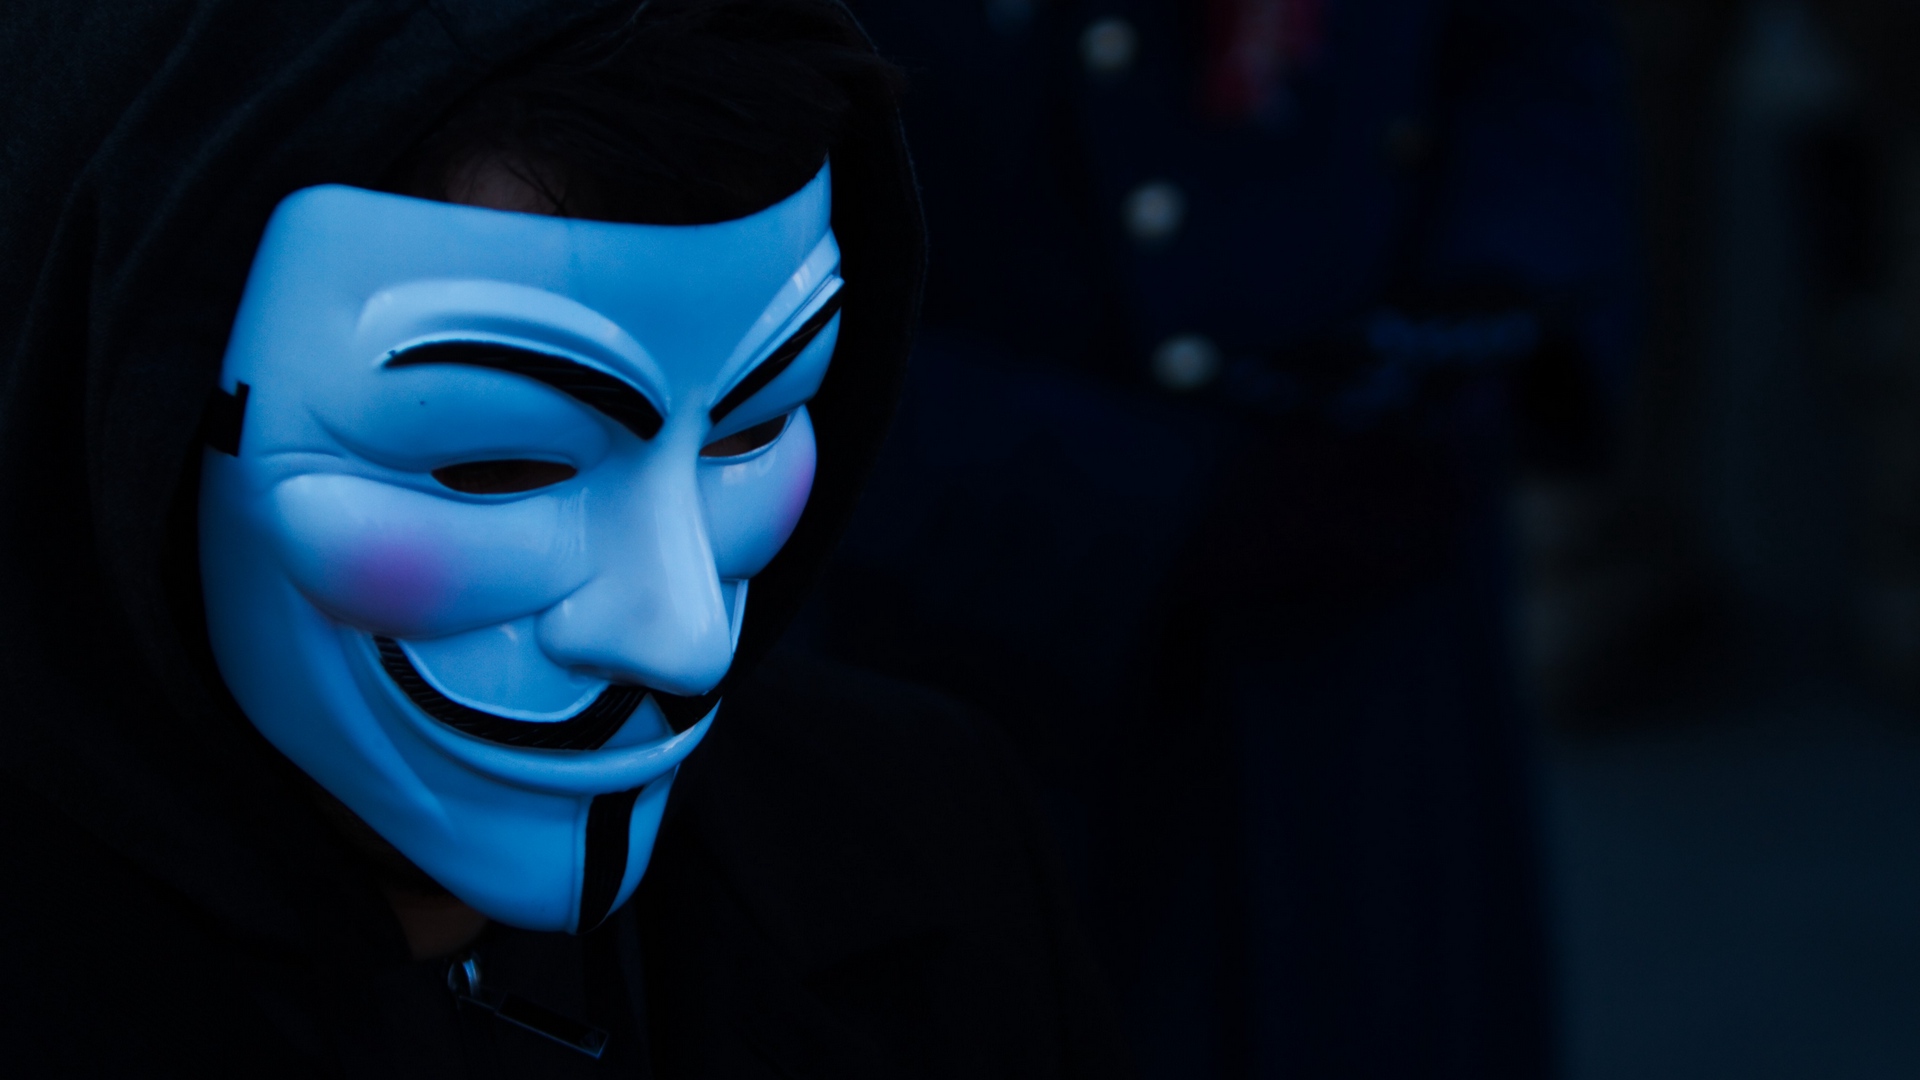 Mask Hoods Anonymous Blue Guy Fawkes Mask Dark 1920x1080